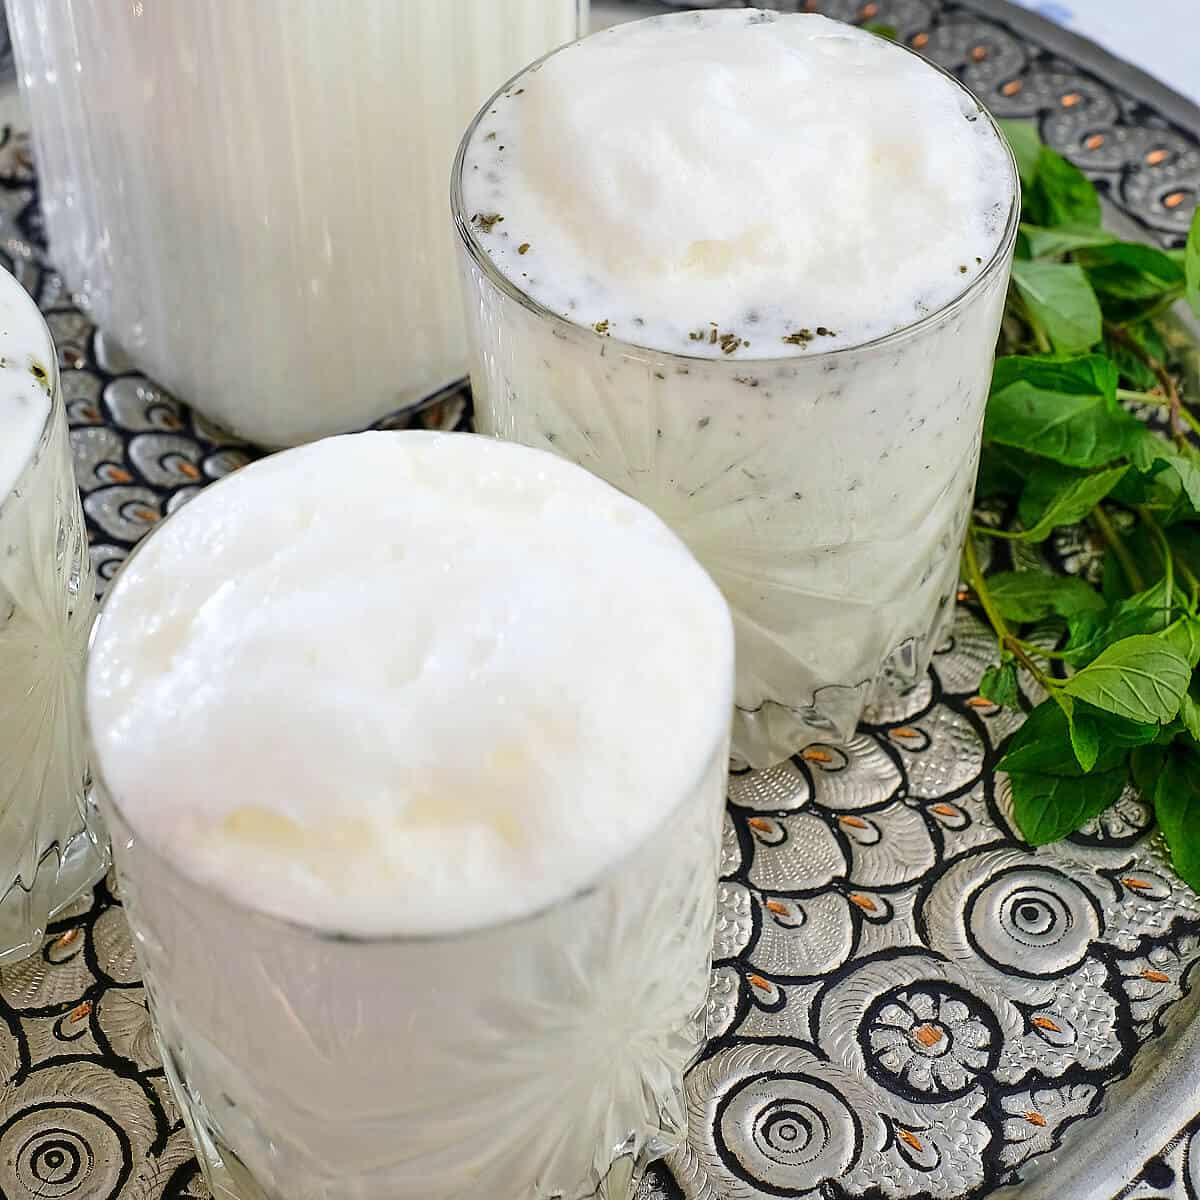 Two glasses will of Ayran drink.